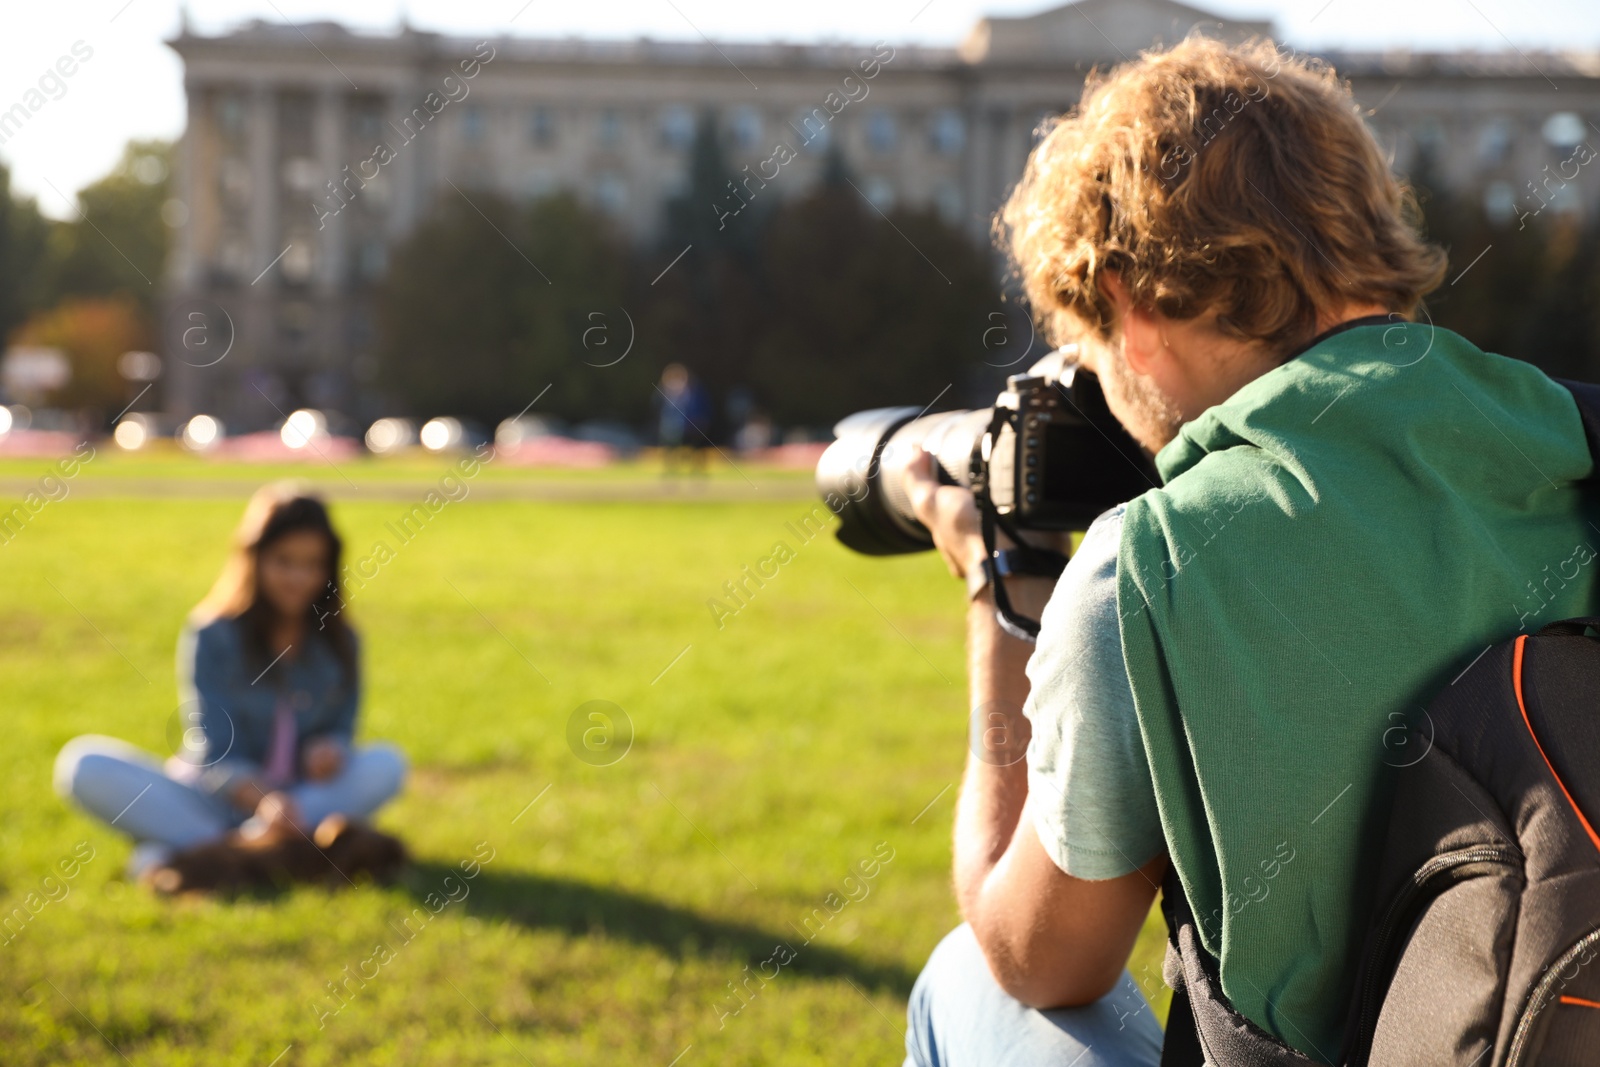 Photo of Male photographer taking photo of young woman with professional camera on grass outdoors